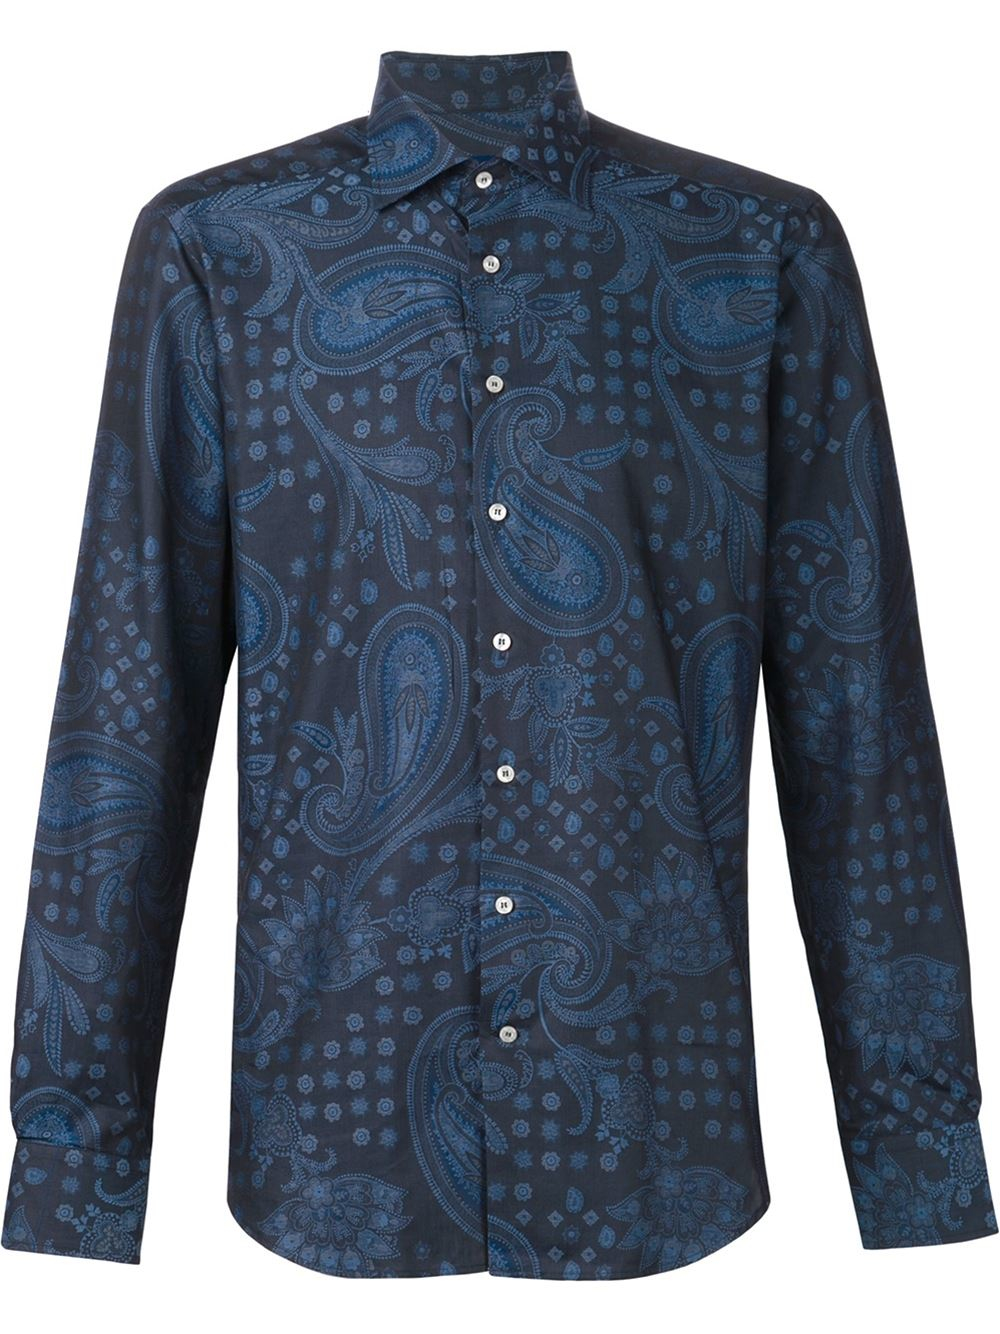 Etro Woven Paisley Shirt in Blue for Men